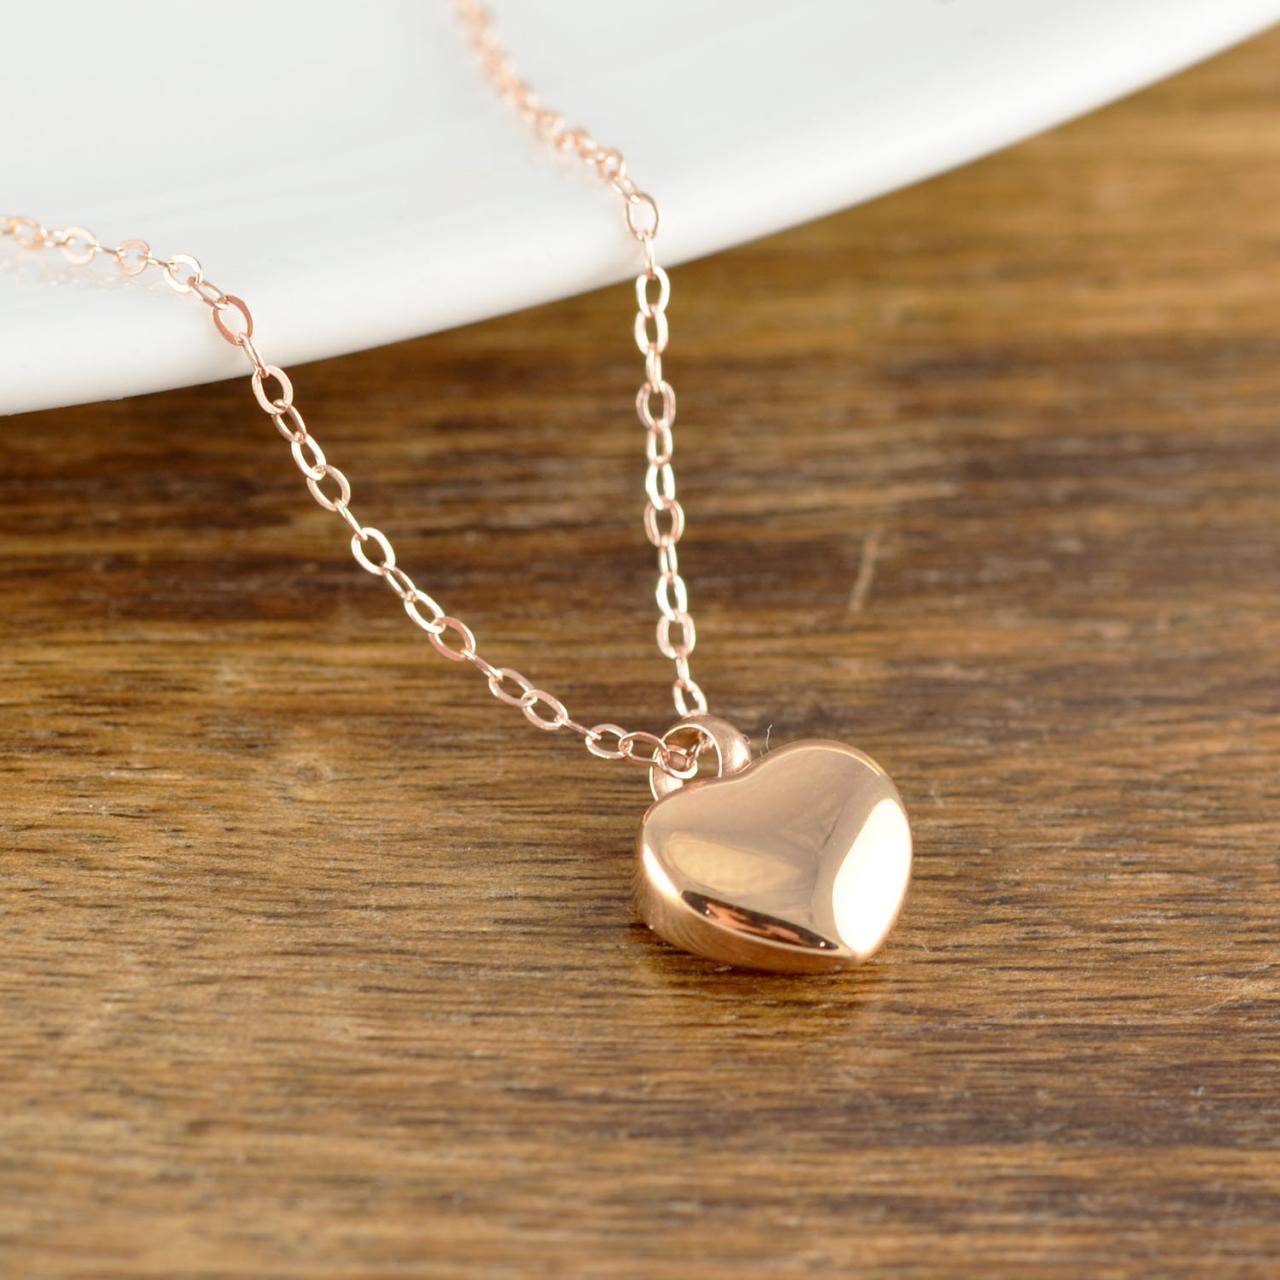 Cremation Jewelry, Ash Jewelry, Heart Cremation Pendant, Urn Necklace For Ashes, Rose Gold Heart Necklace, Cremation Necklace